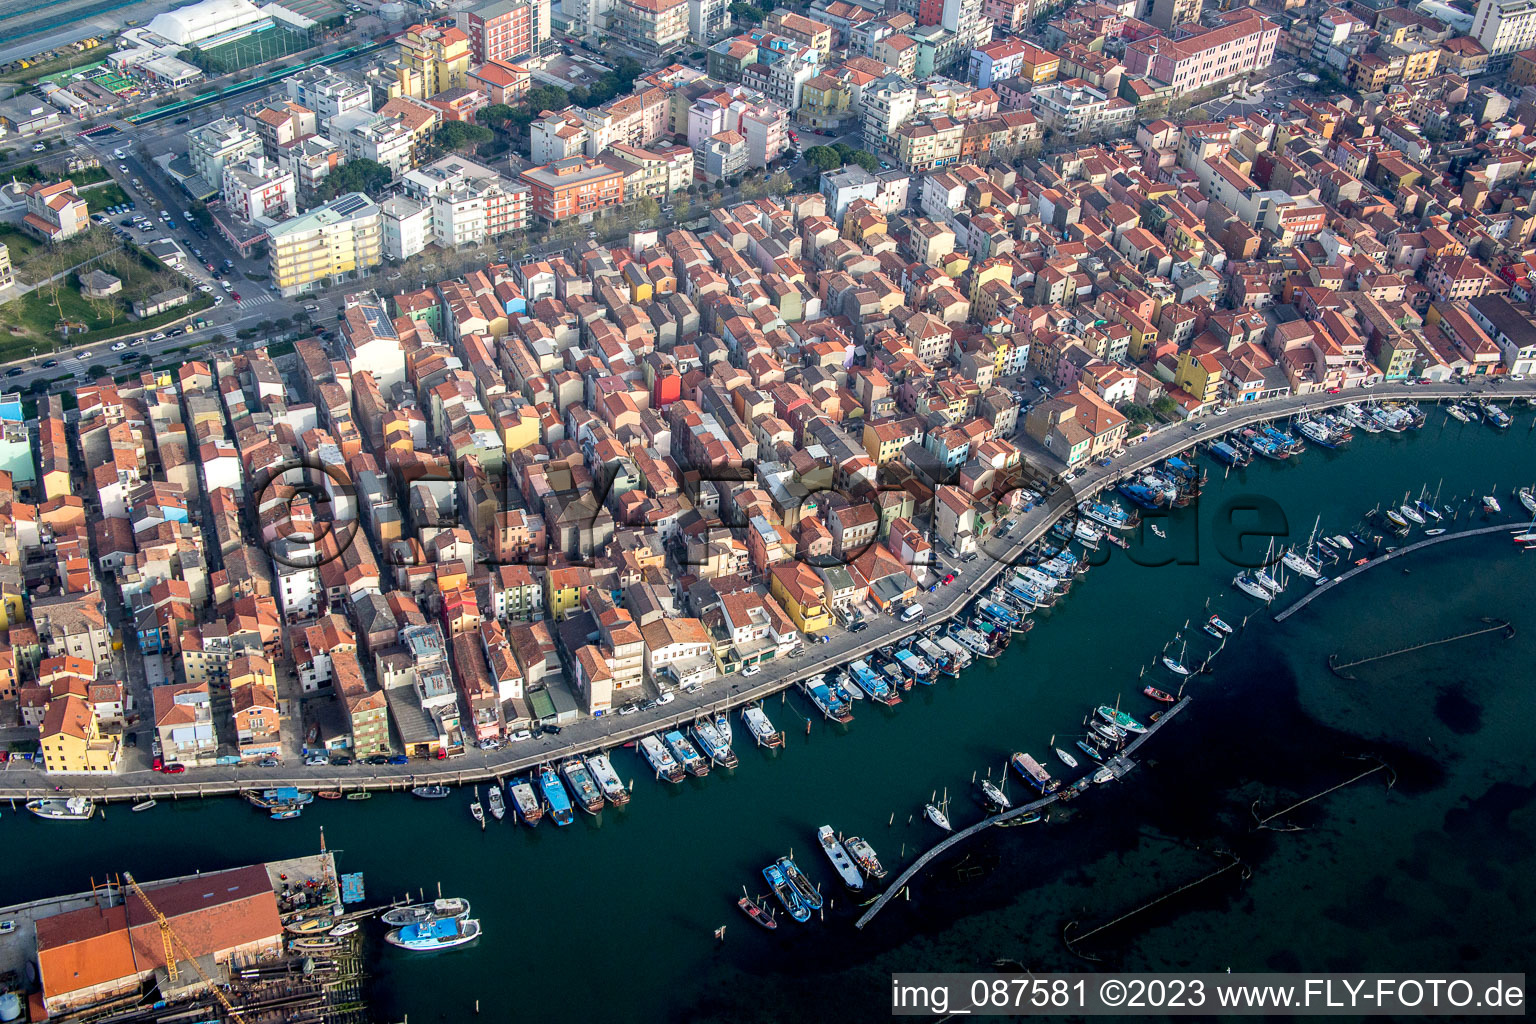 Chioggia in the state Veneto, Italy from above